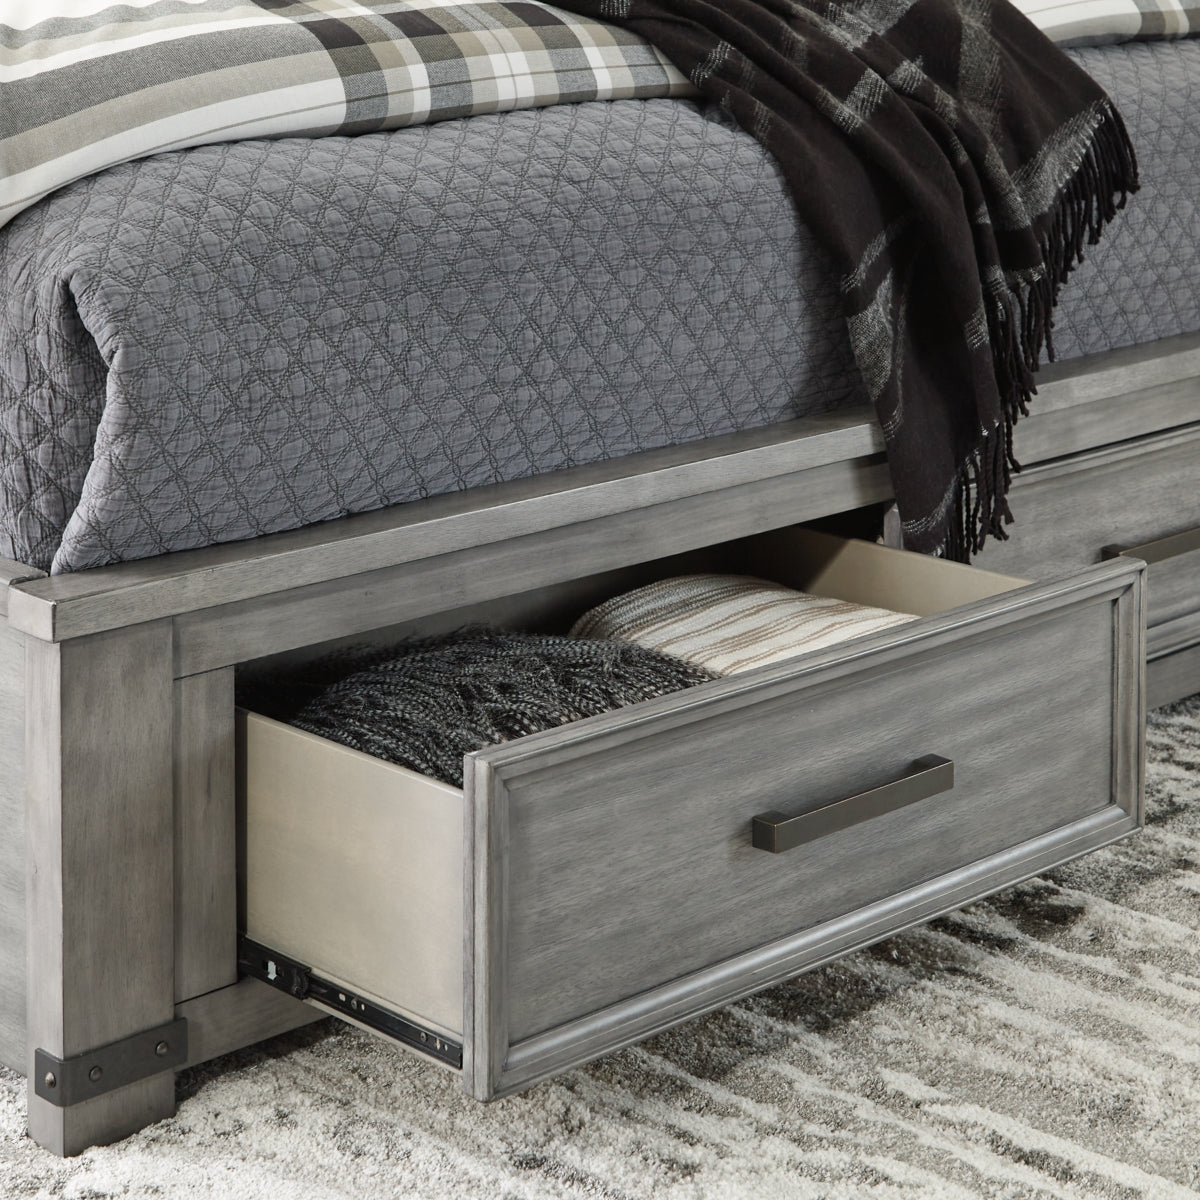 Russelyn King Storage Bed - furniture place usa